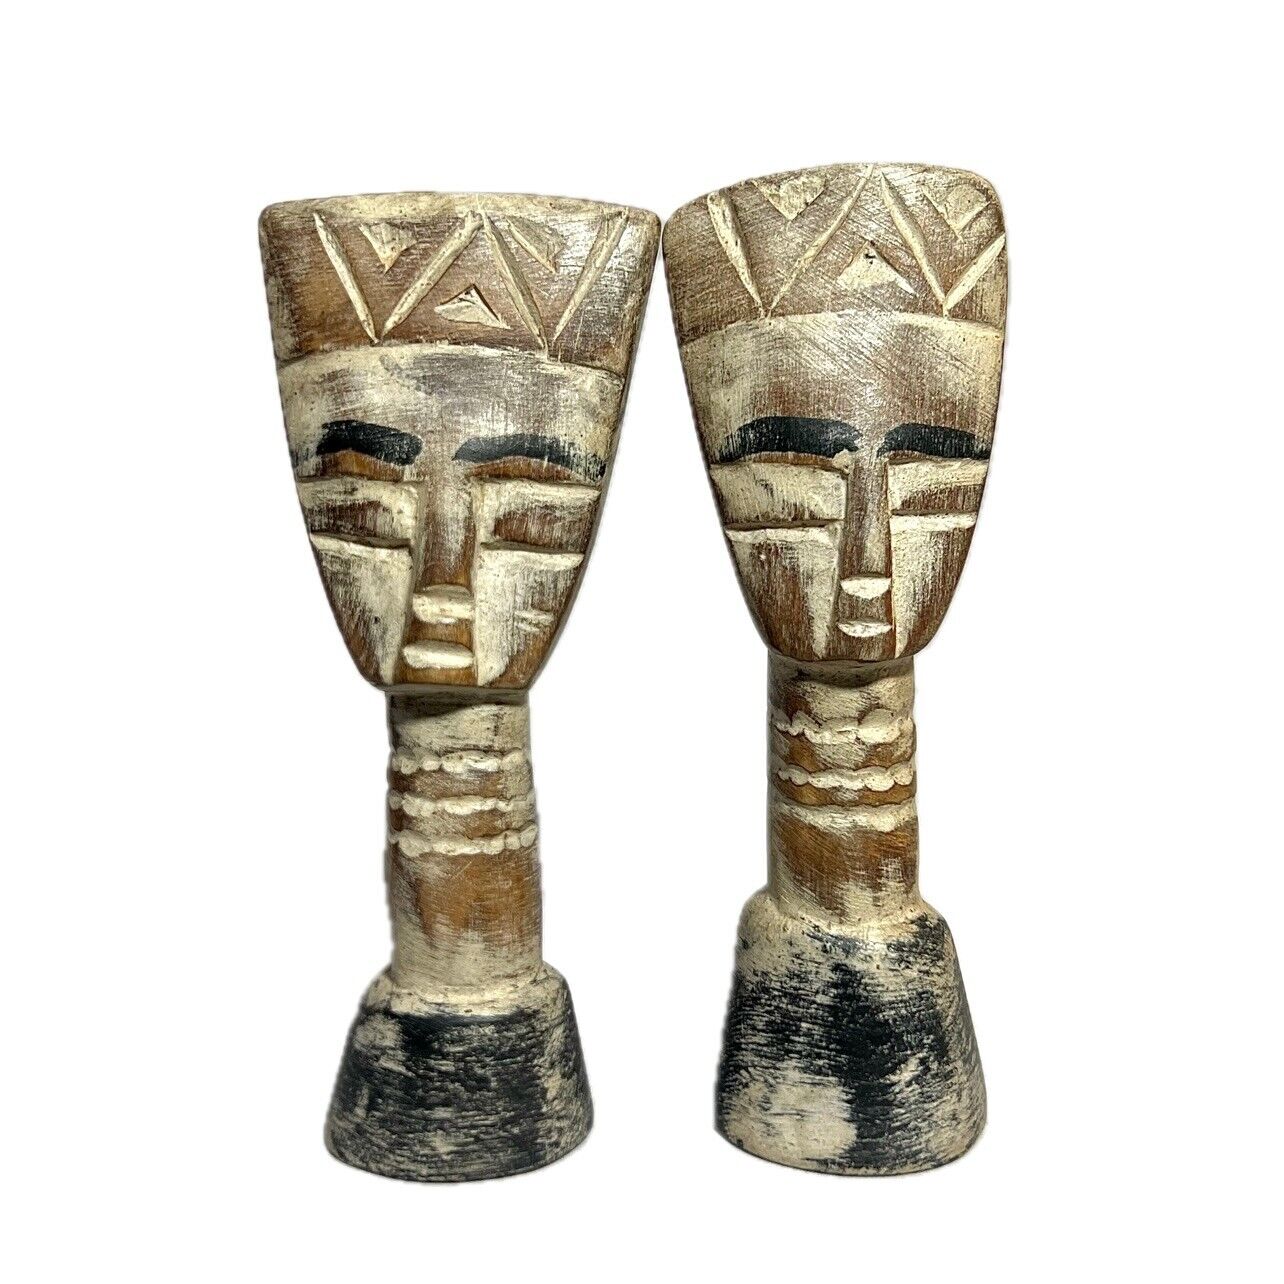 African two piece lot featuring tribal art statues from the Luba tribe-597